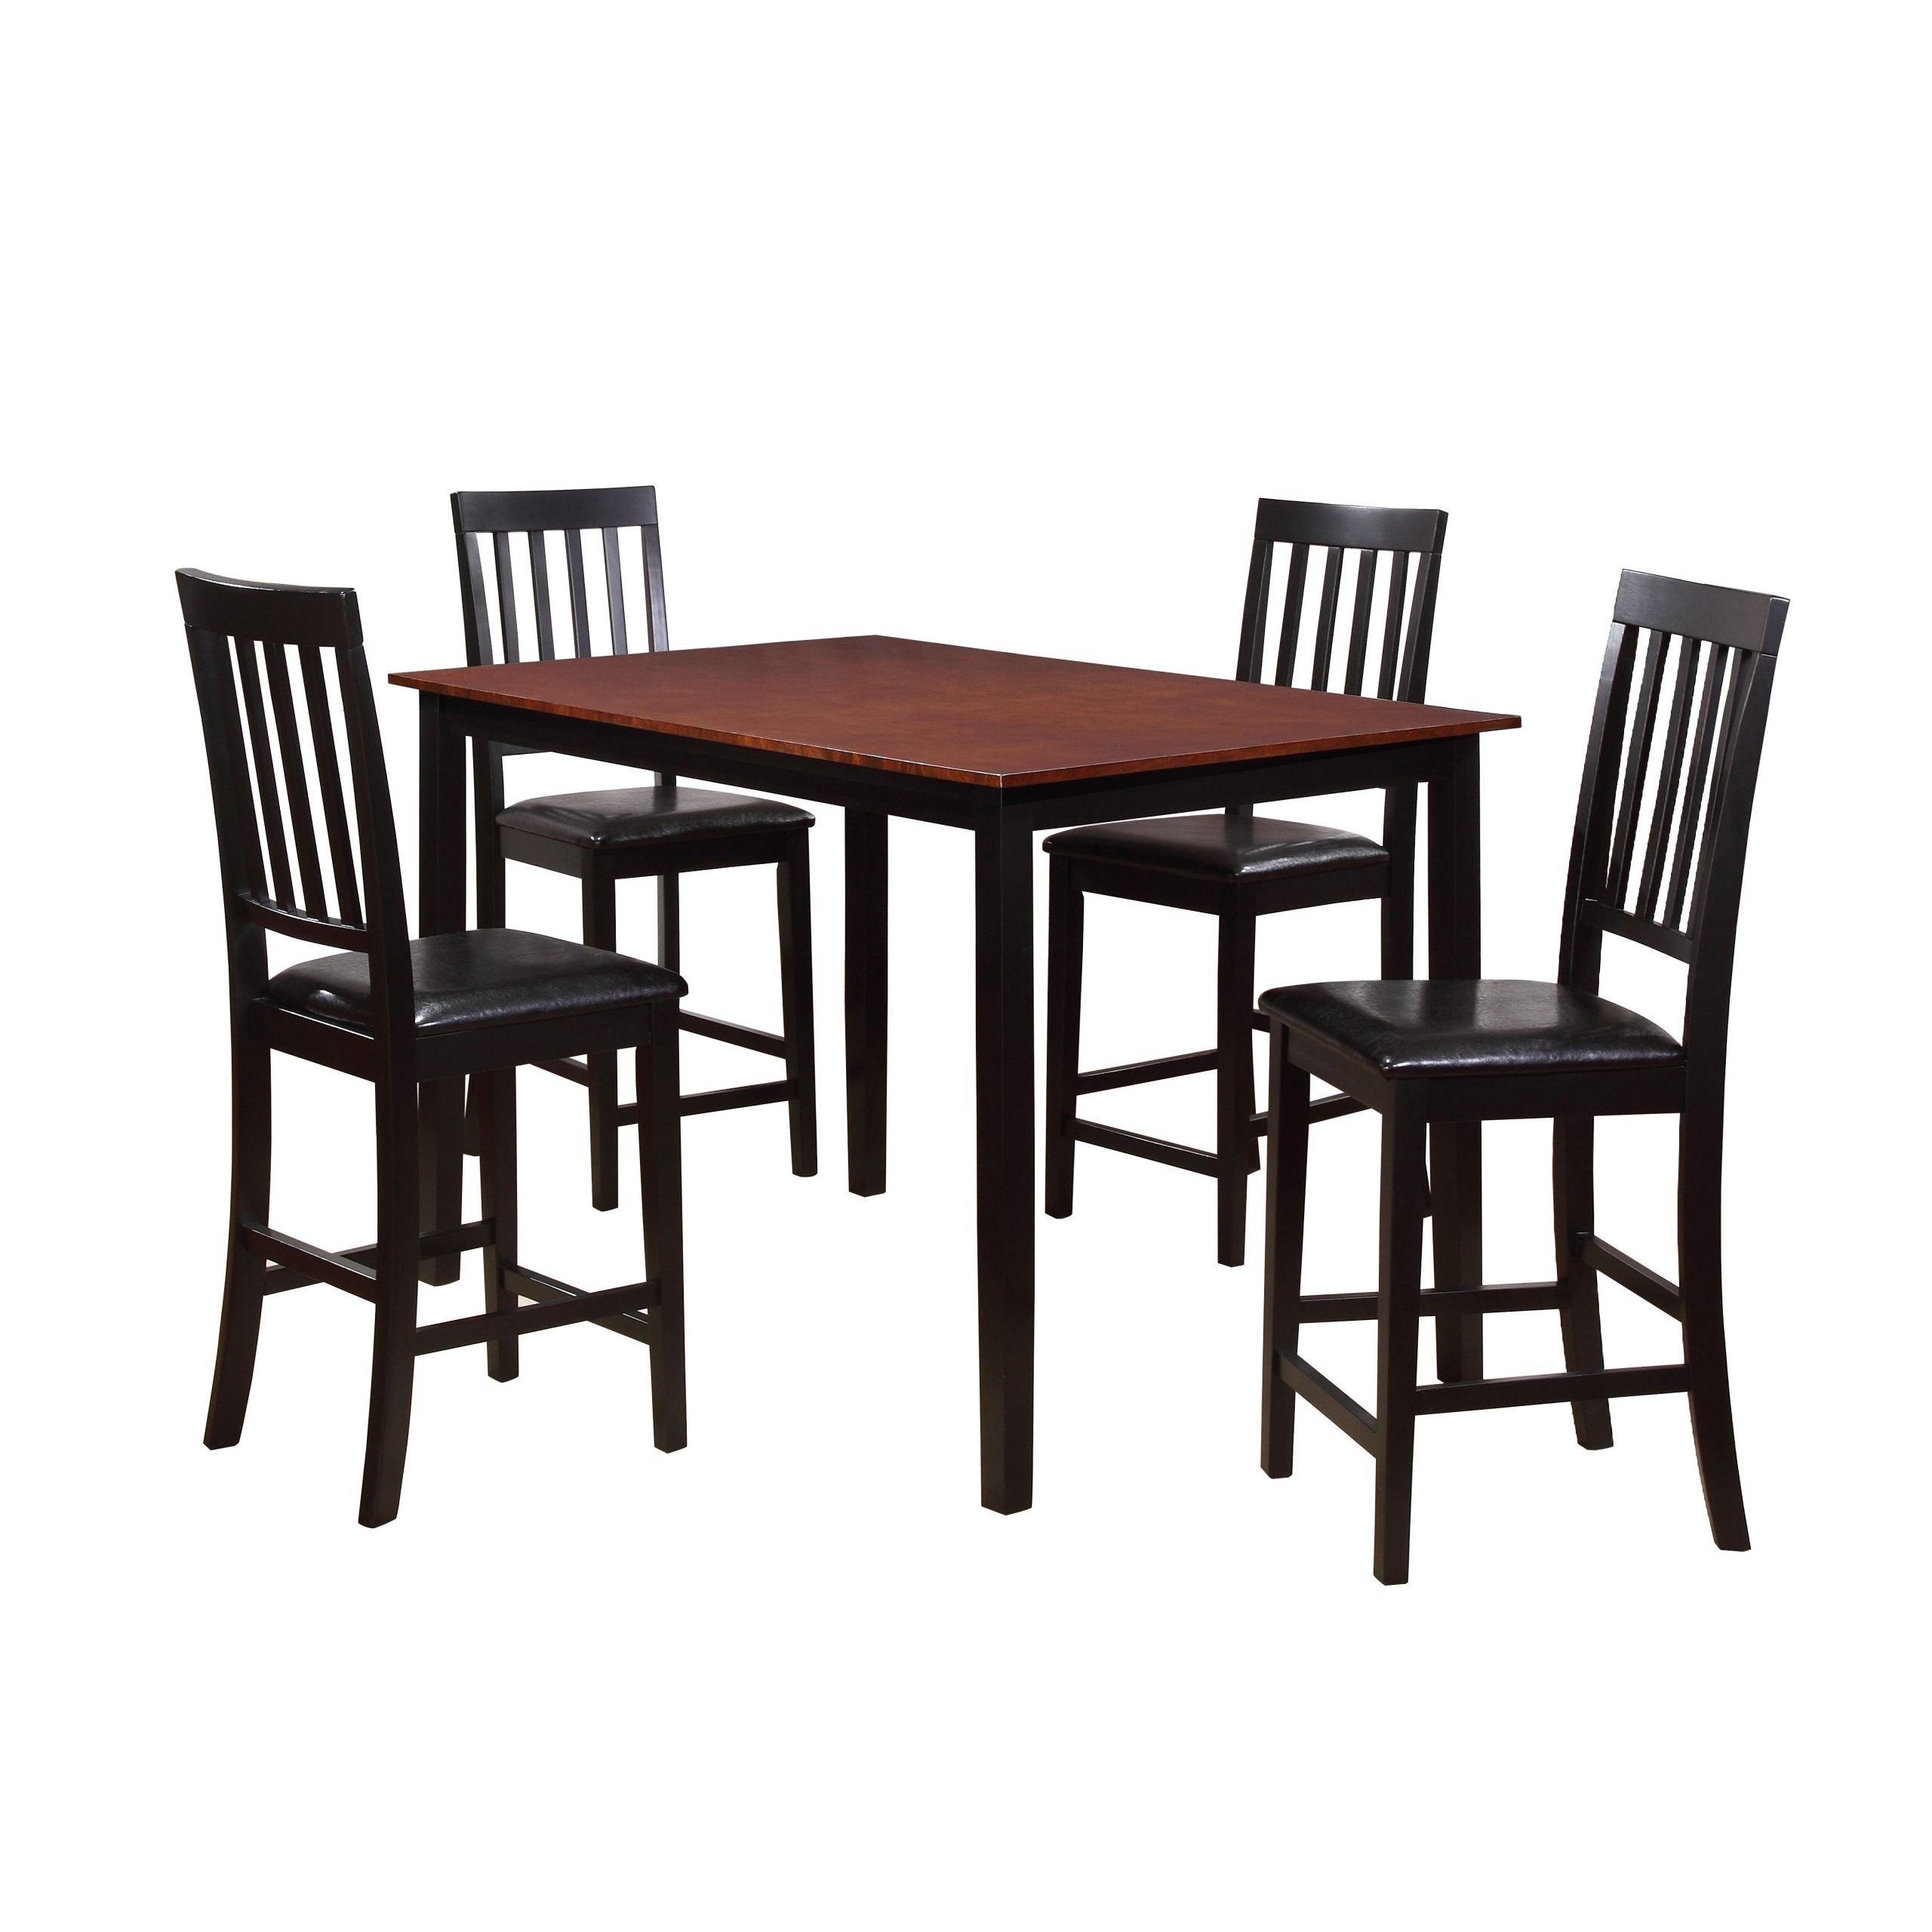 Widely Used Charlton Home Andtree Counter Height Dining Table With Counter Height Dining Tables (View 6 of 20)